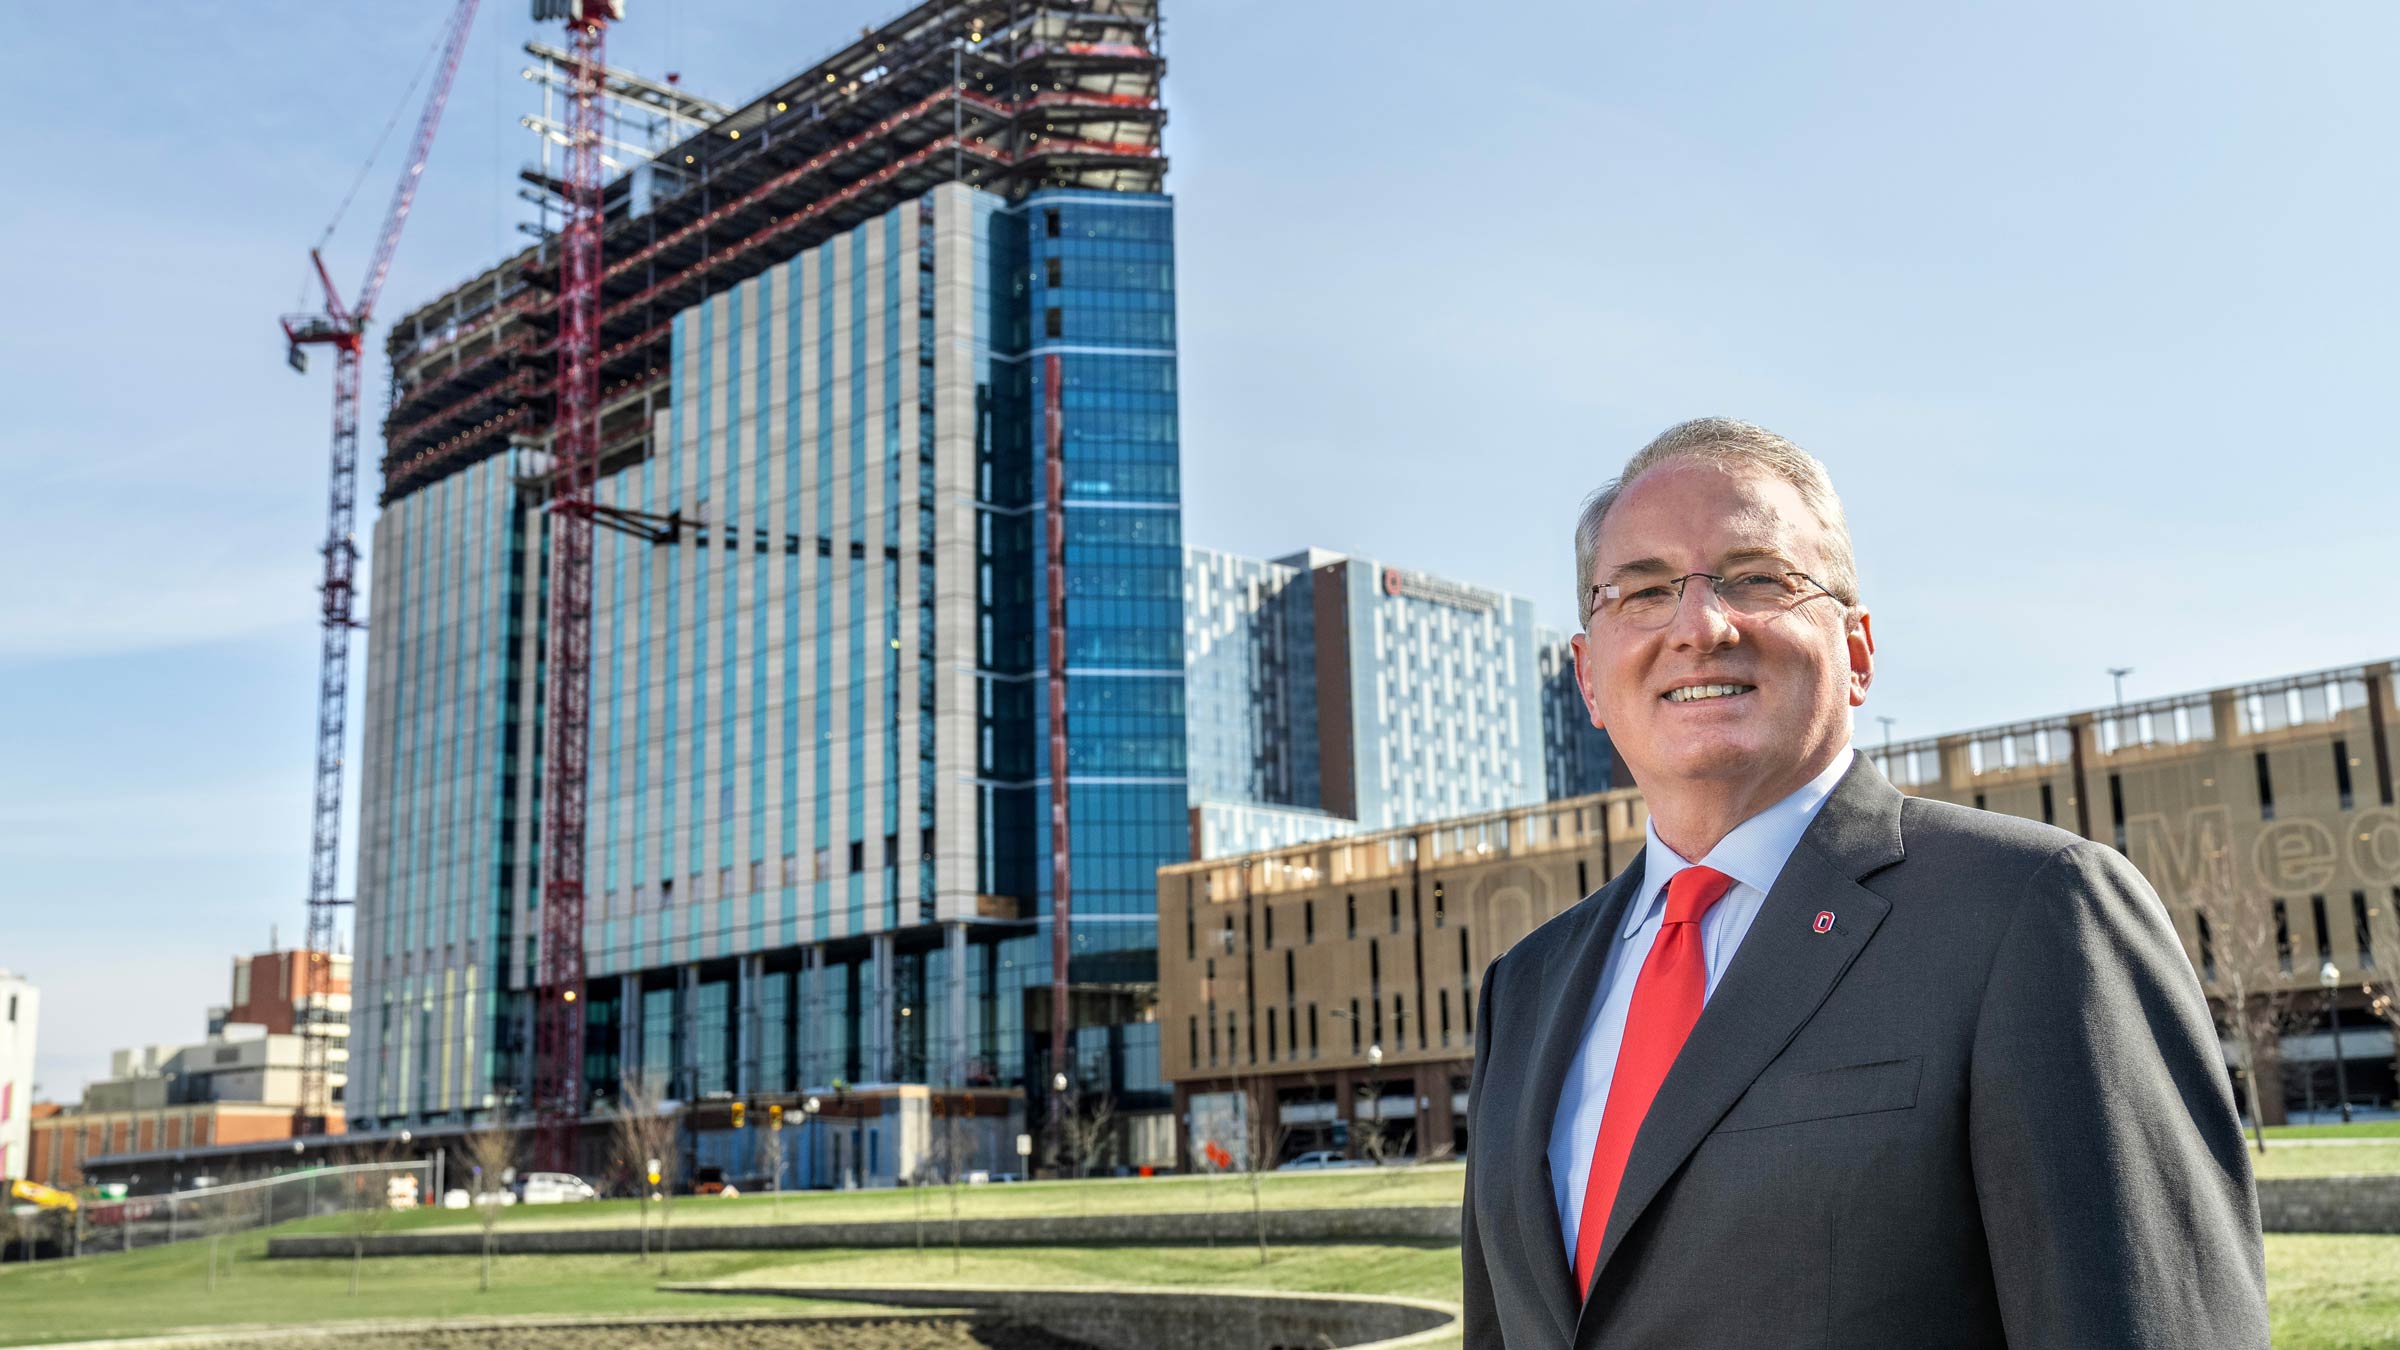 John J. Warner, MD, standing in from of Ohio State's new hospital tower